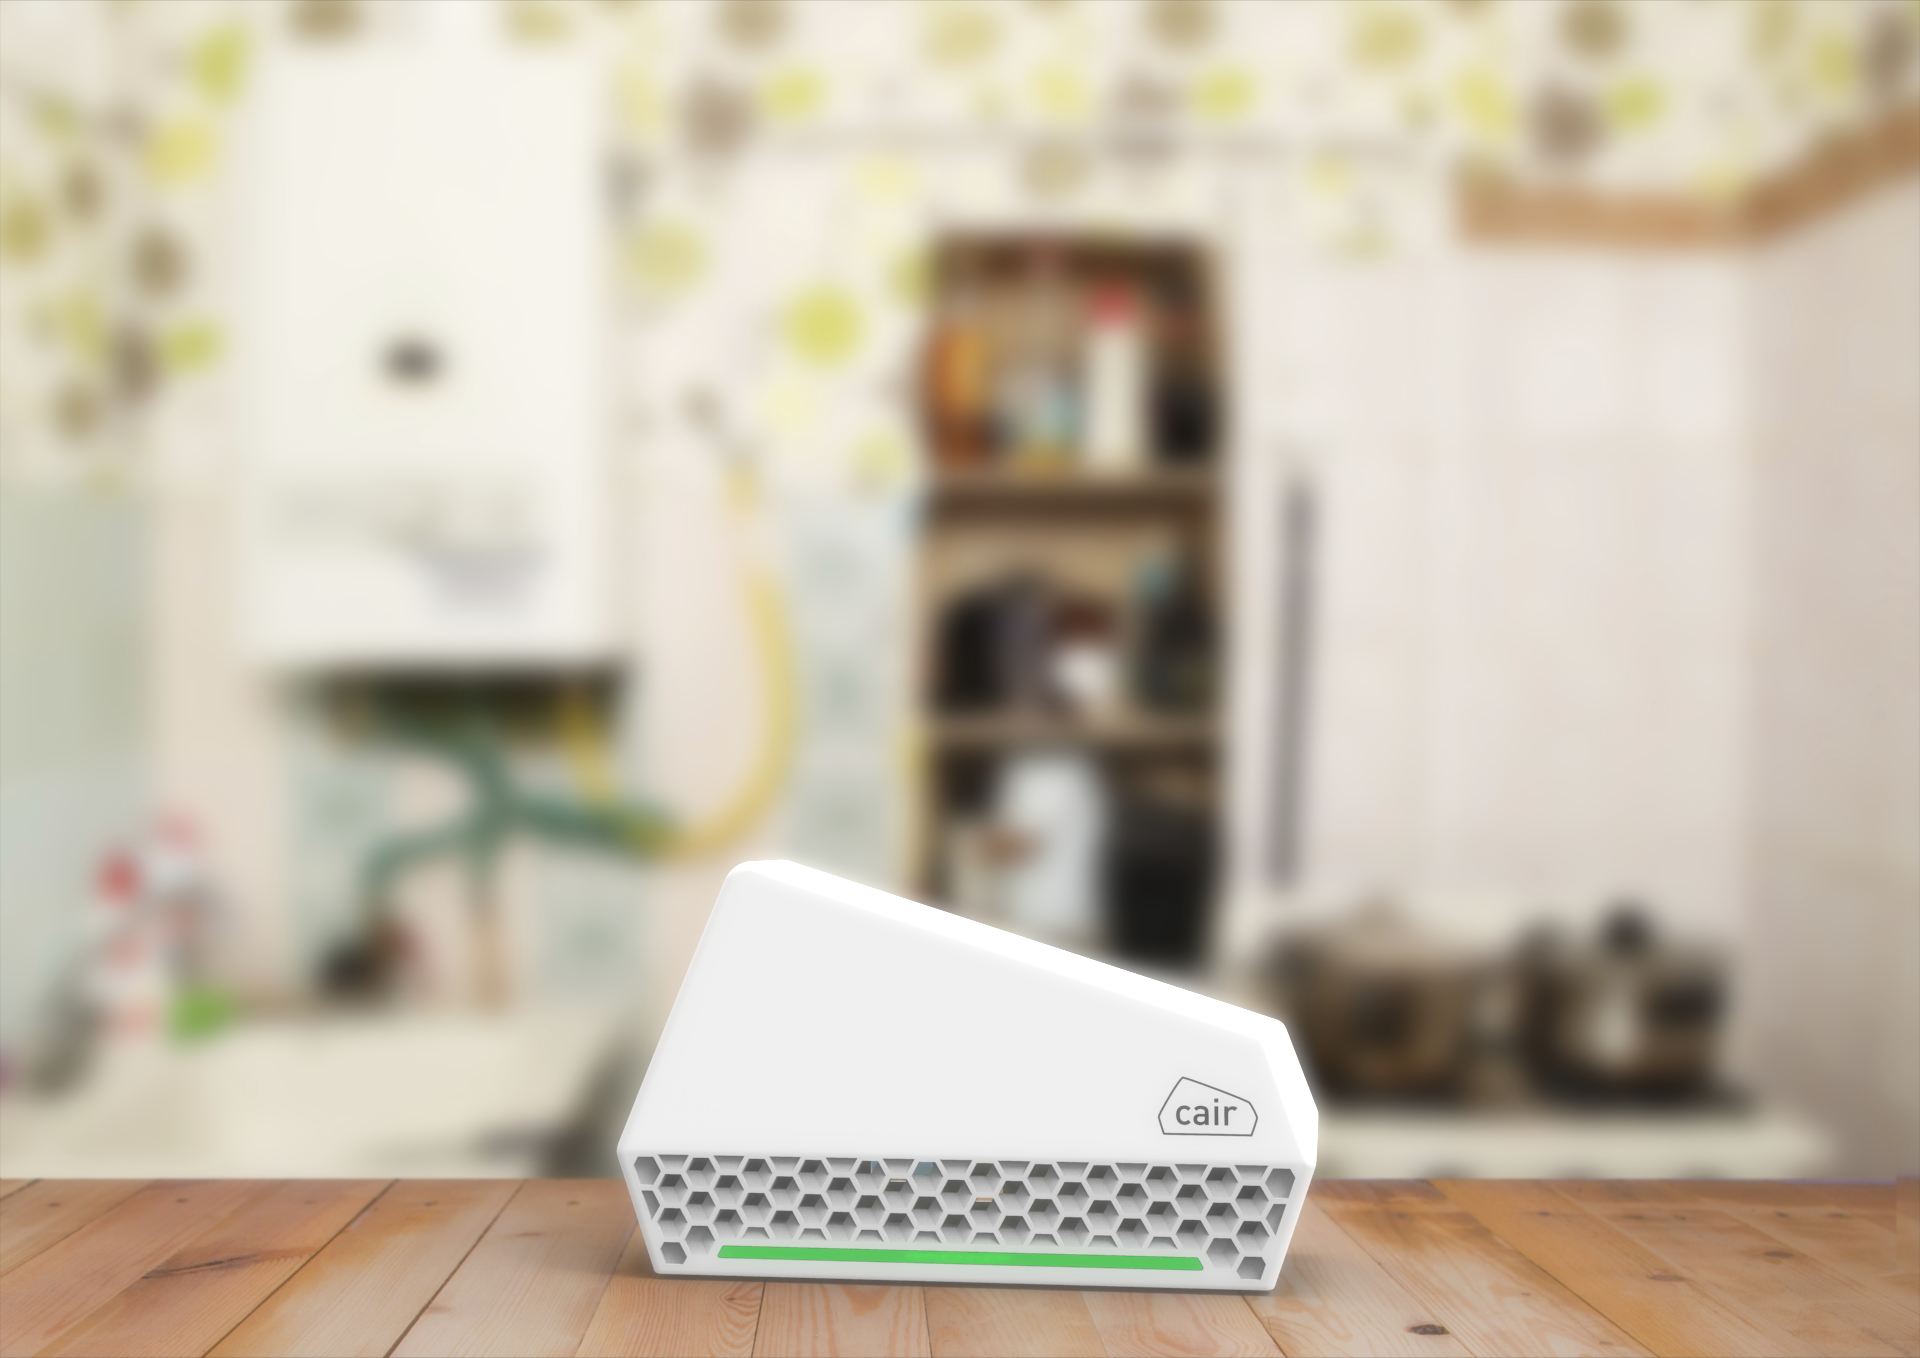 NUWAVE Cair - The Smart Air Quality Monitor